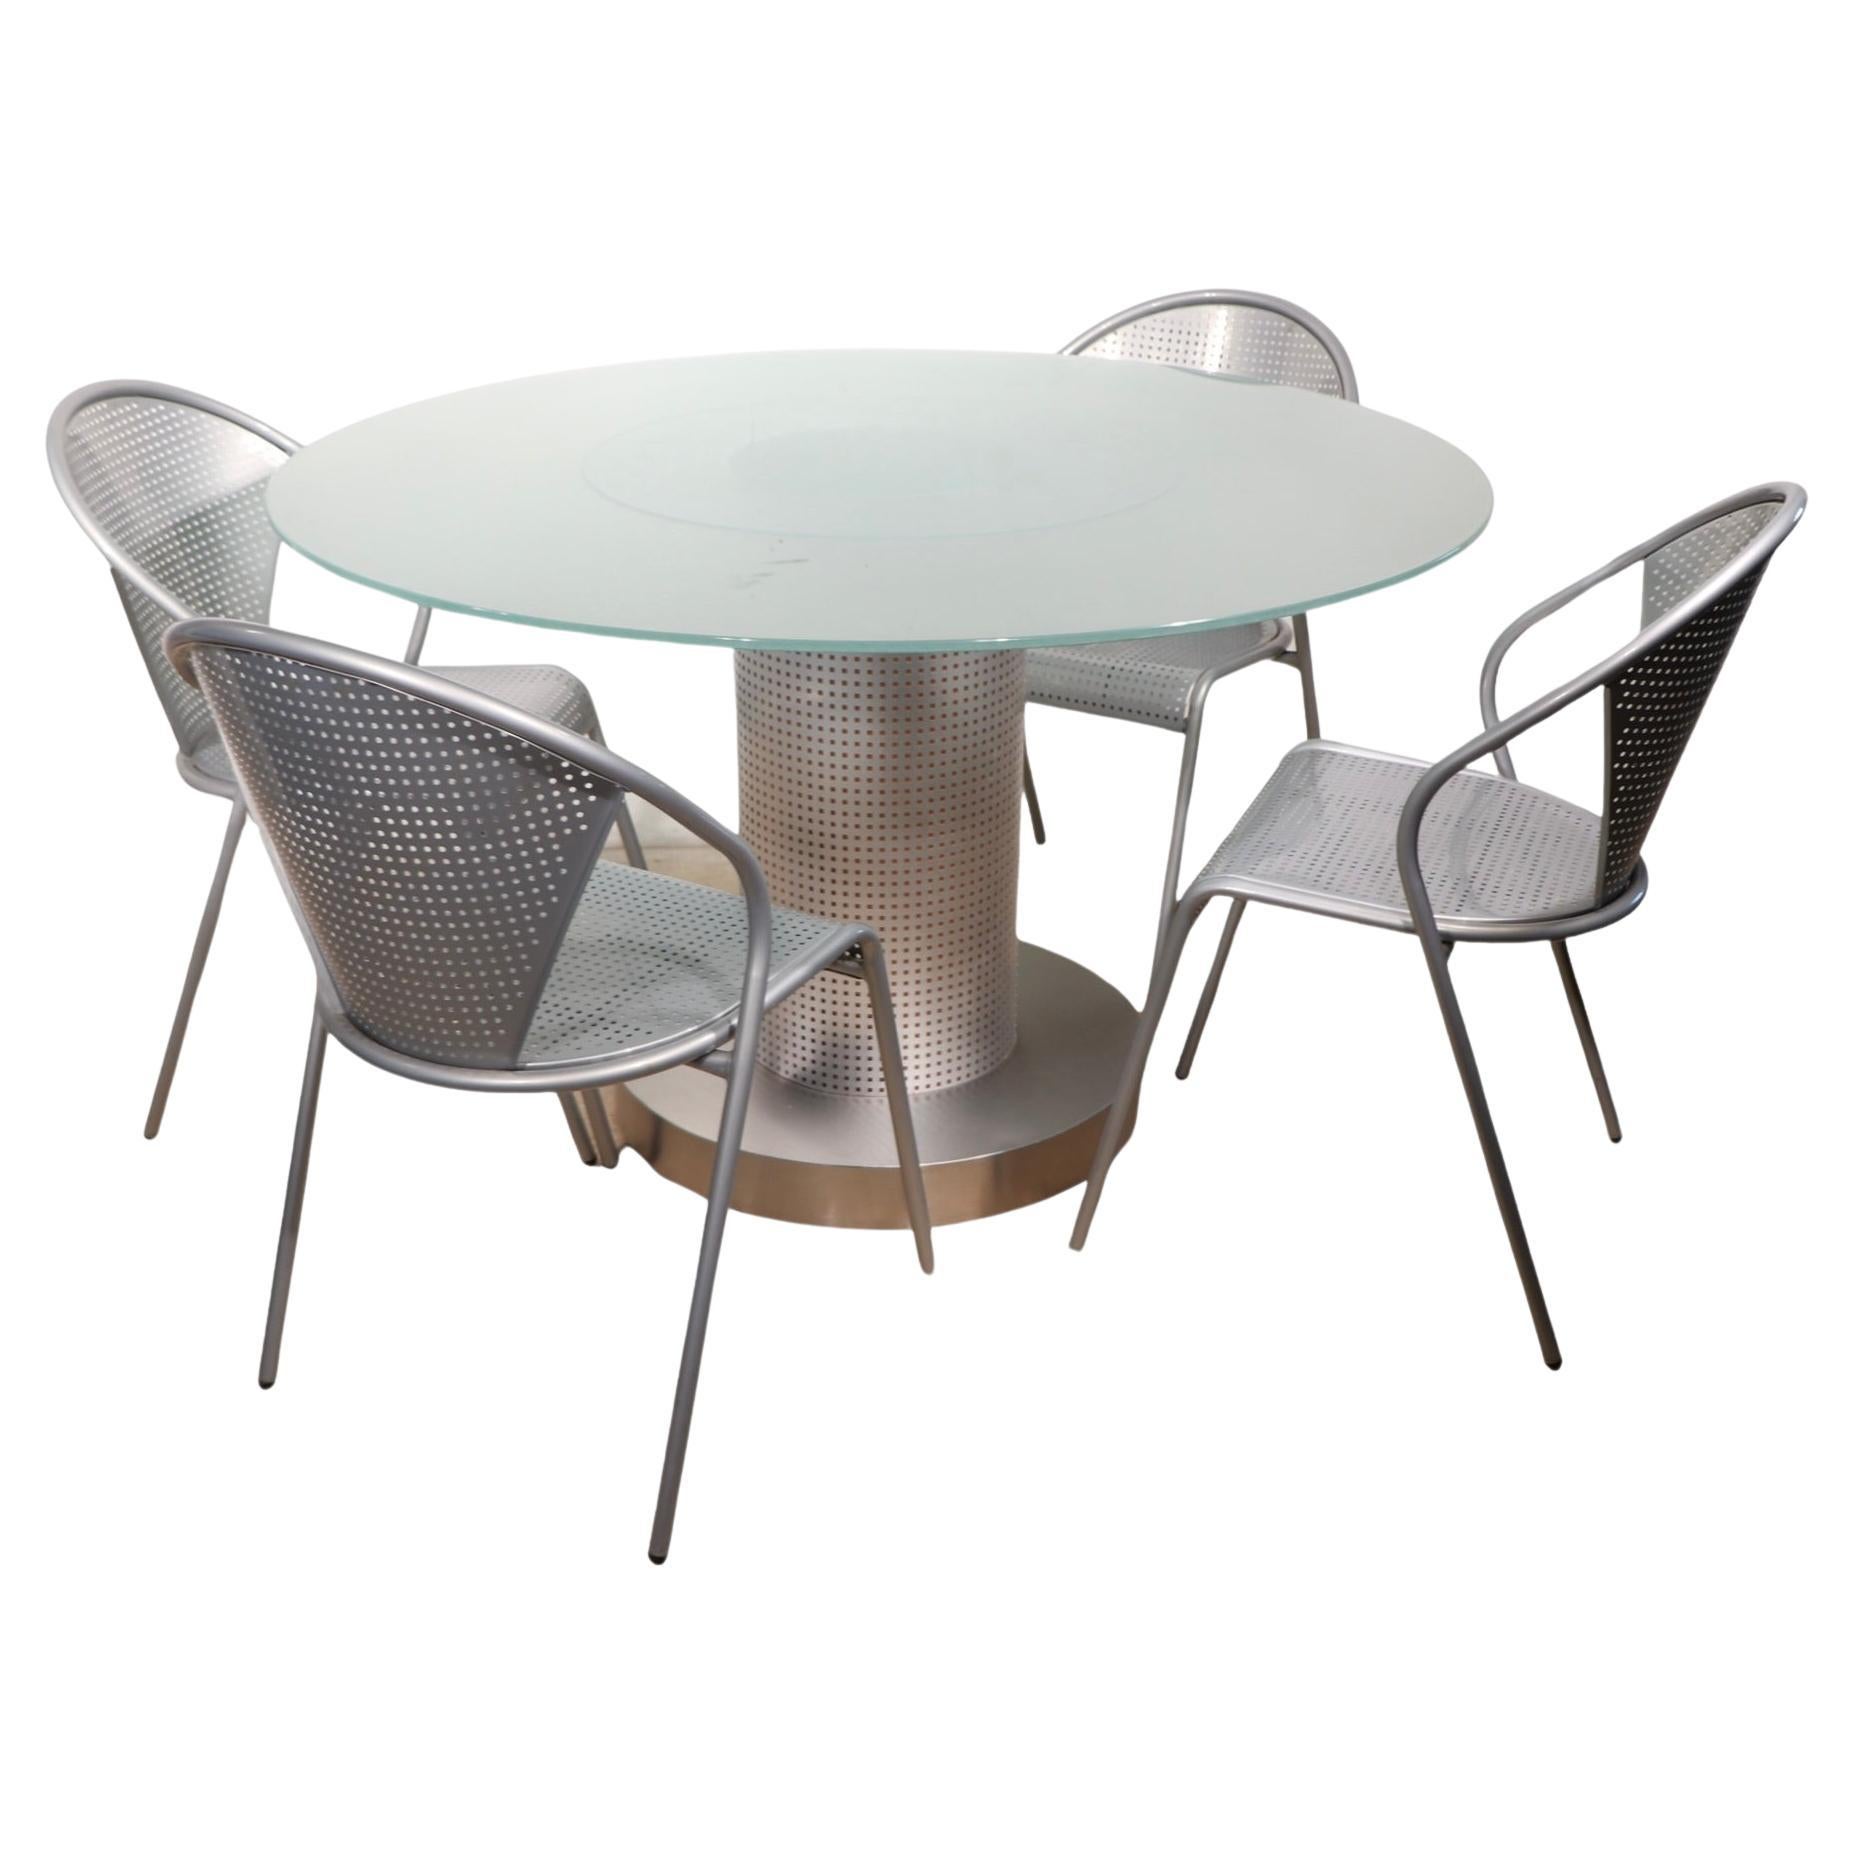 5 pc. Post Modern Dinette Set by Euro Style Glass Top Table with Metal Chairs